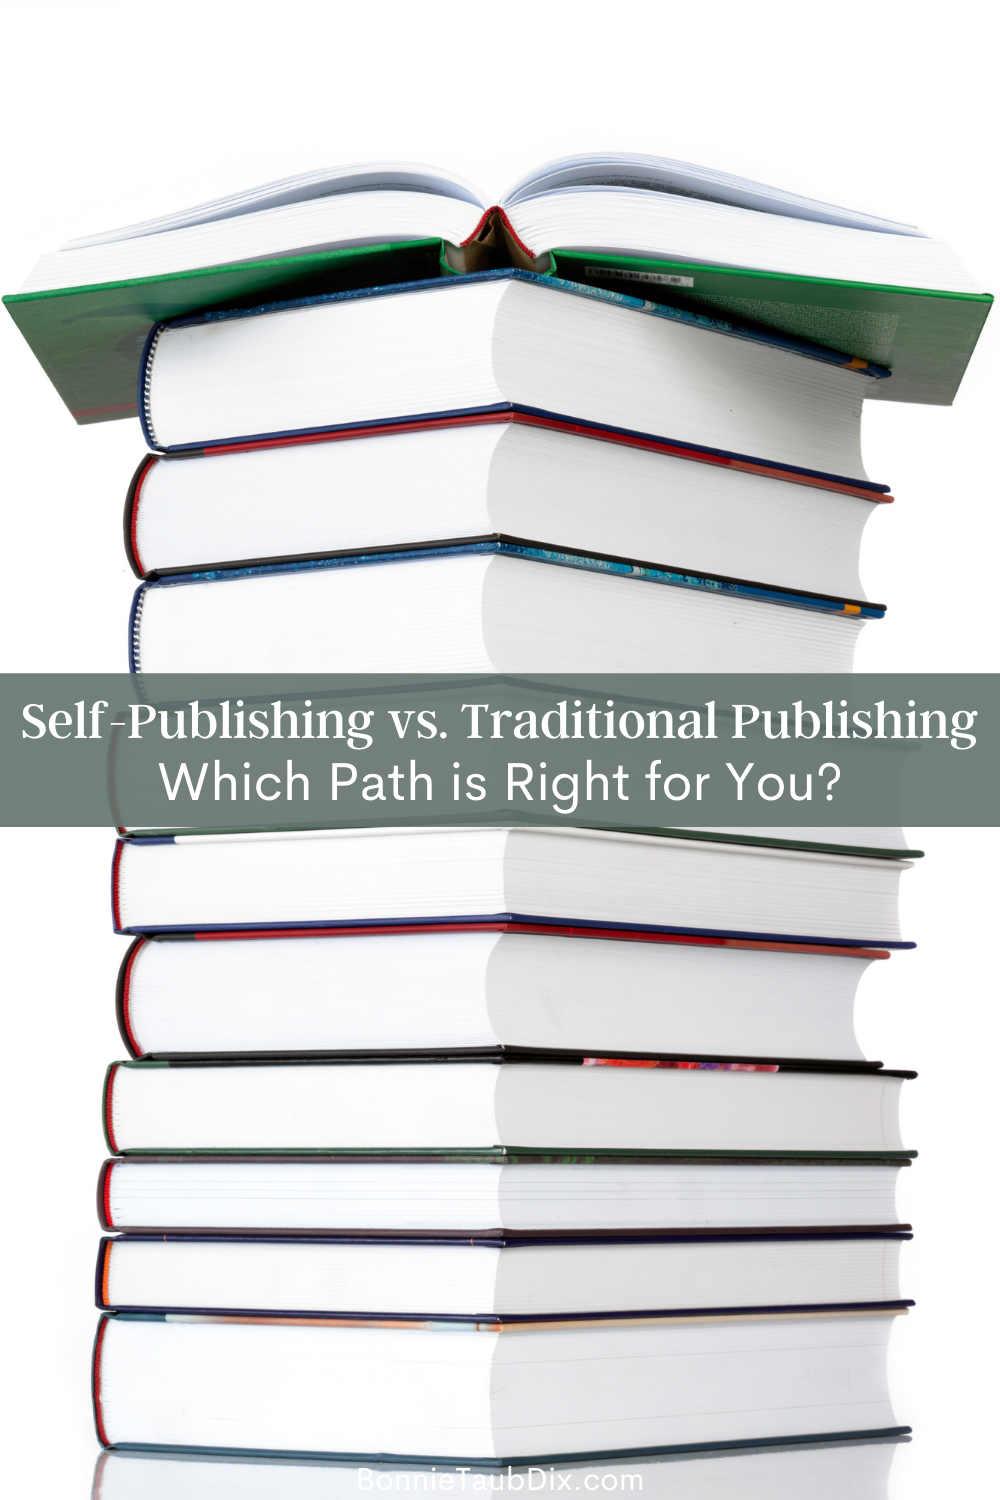 Self-Publishing vs. Traditional Publishing: Which Path is Right for You? | A discussion on whether self-publishing or going the traditional route with a publisher is better for a first time author.